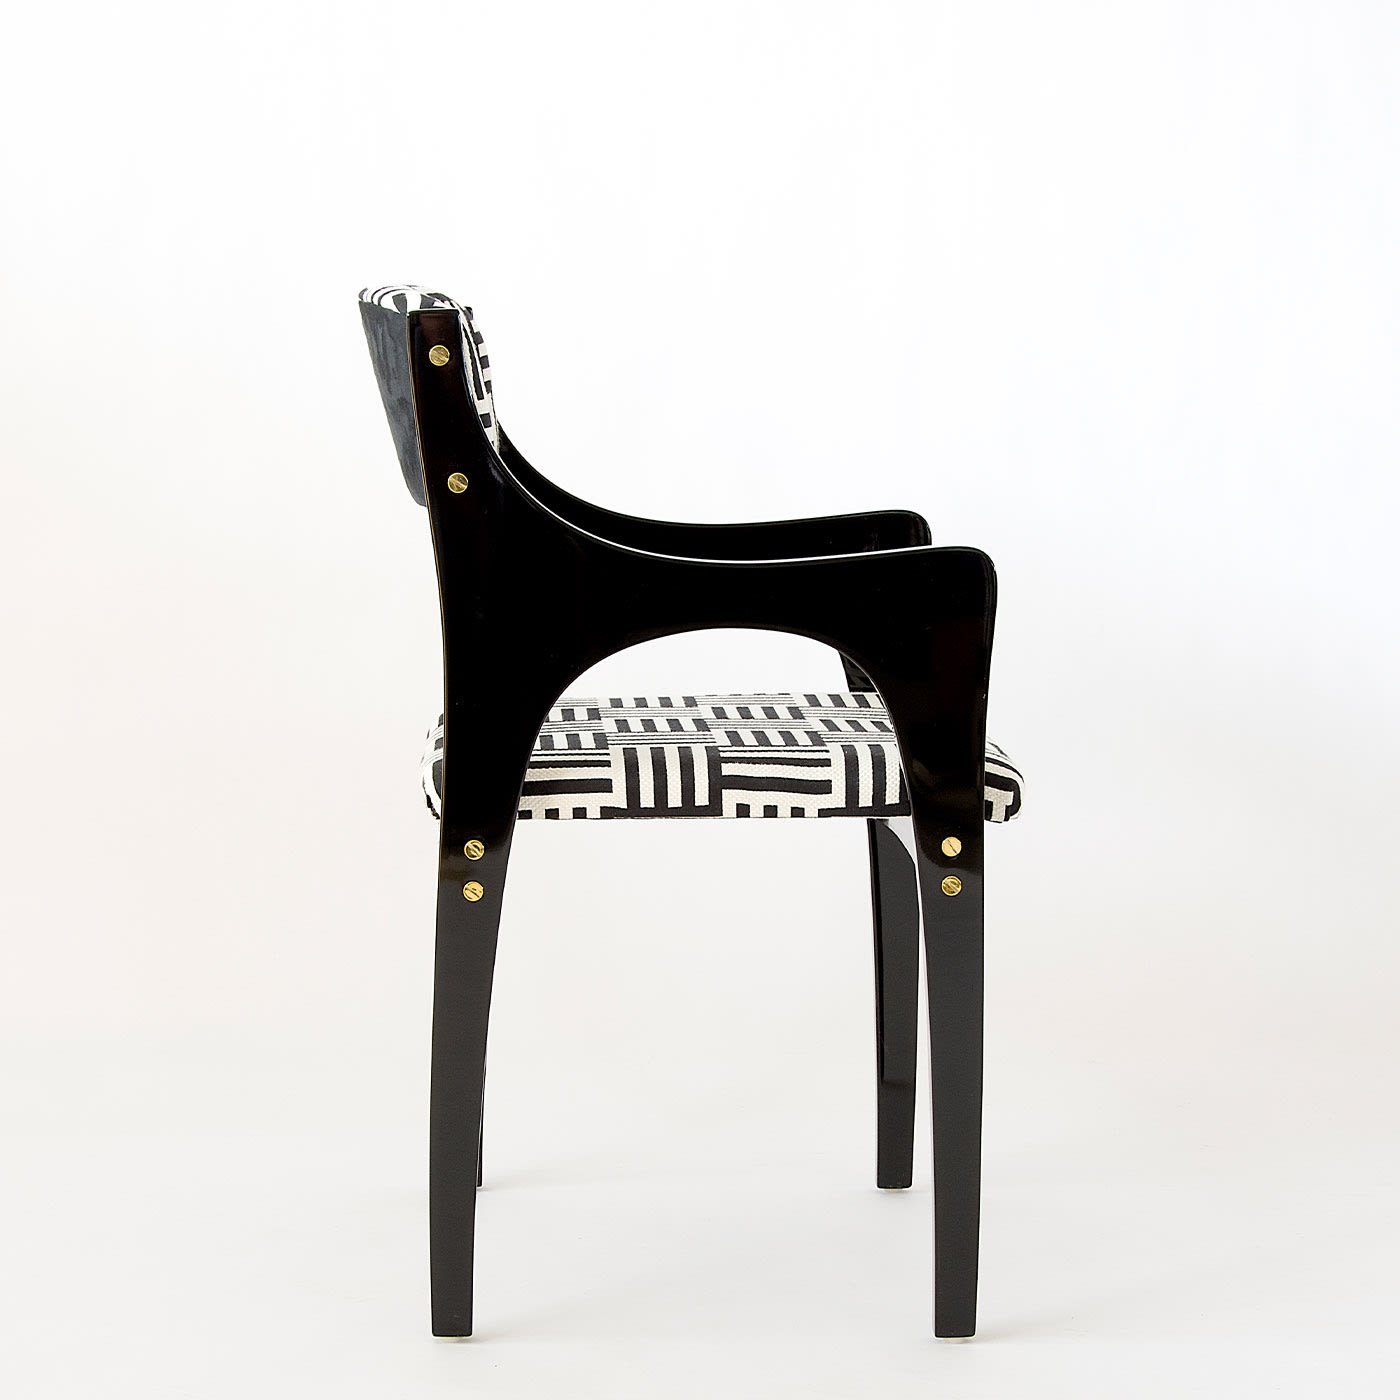 Lola 50's-Inspired Black & White Chair With Arms - Extroverso